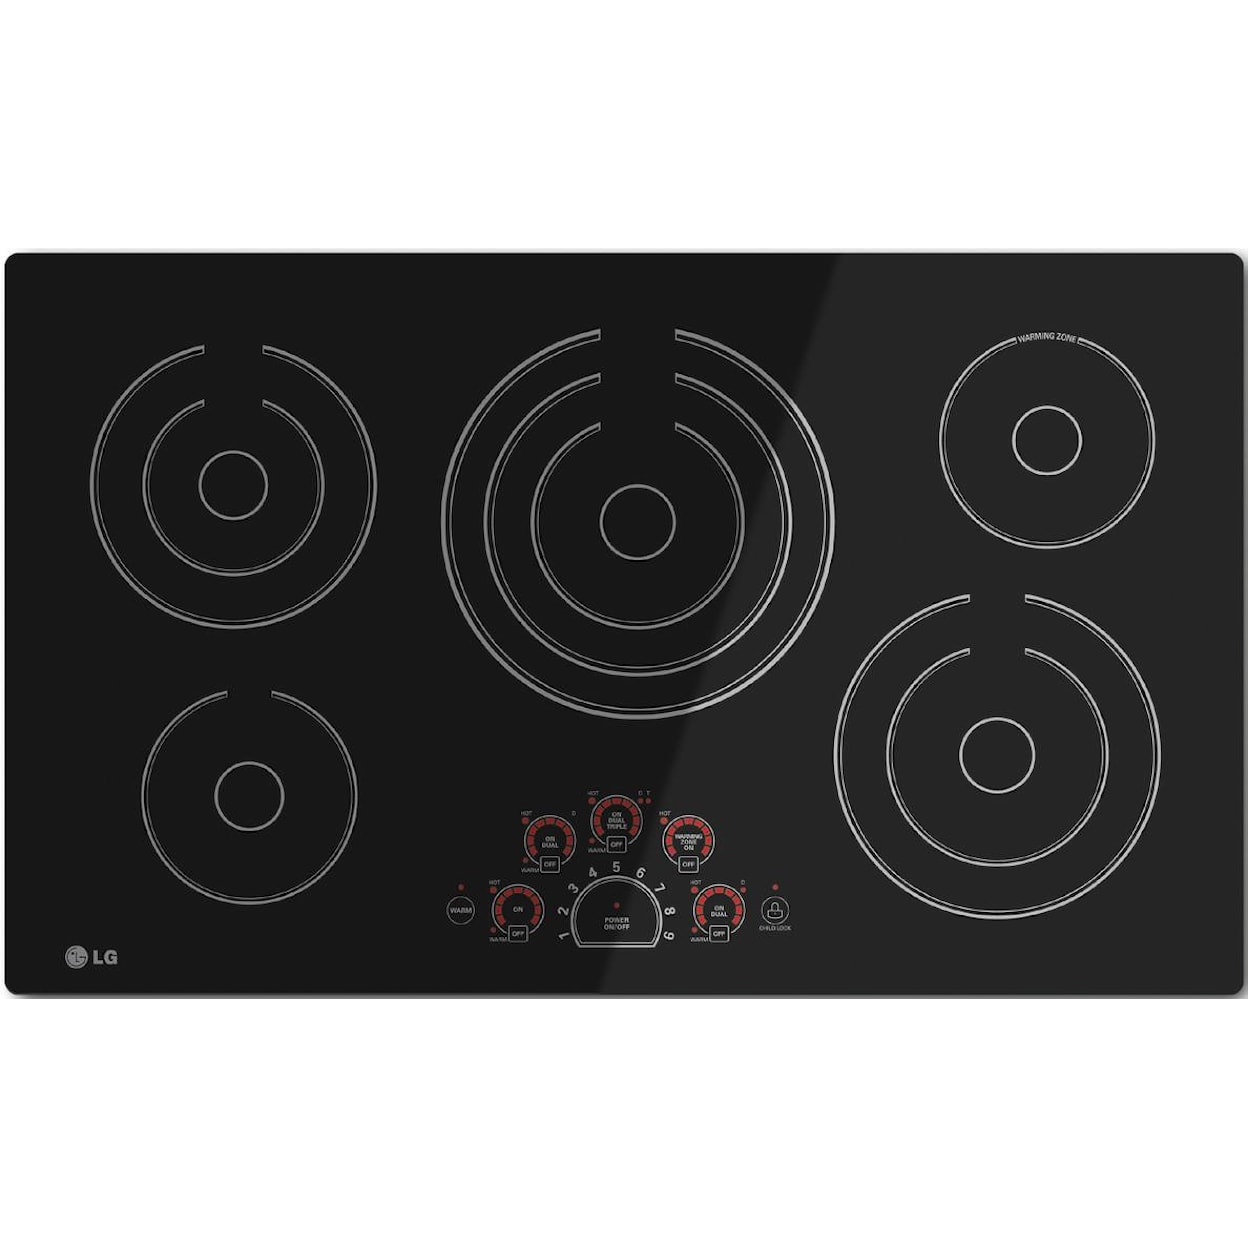 LG Appliances Cooktops 36" Built-In Electric Cooktop